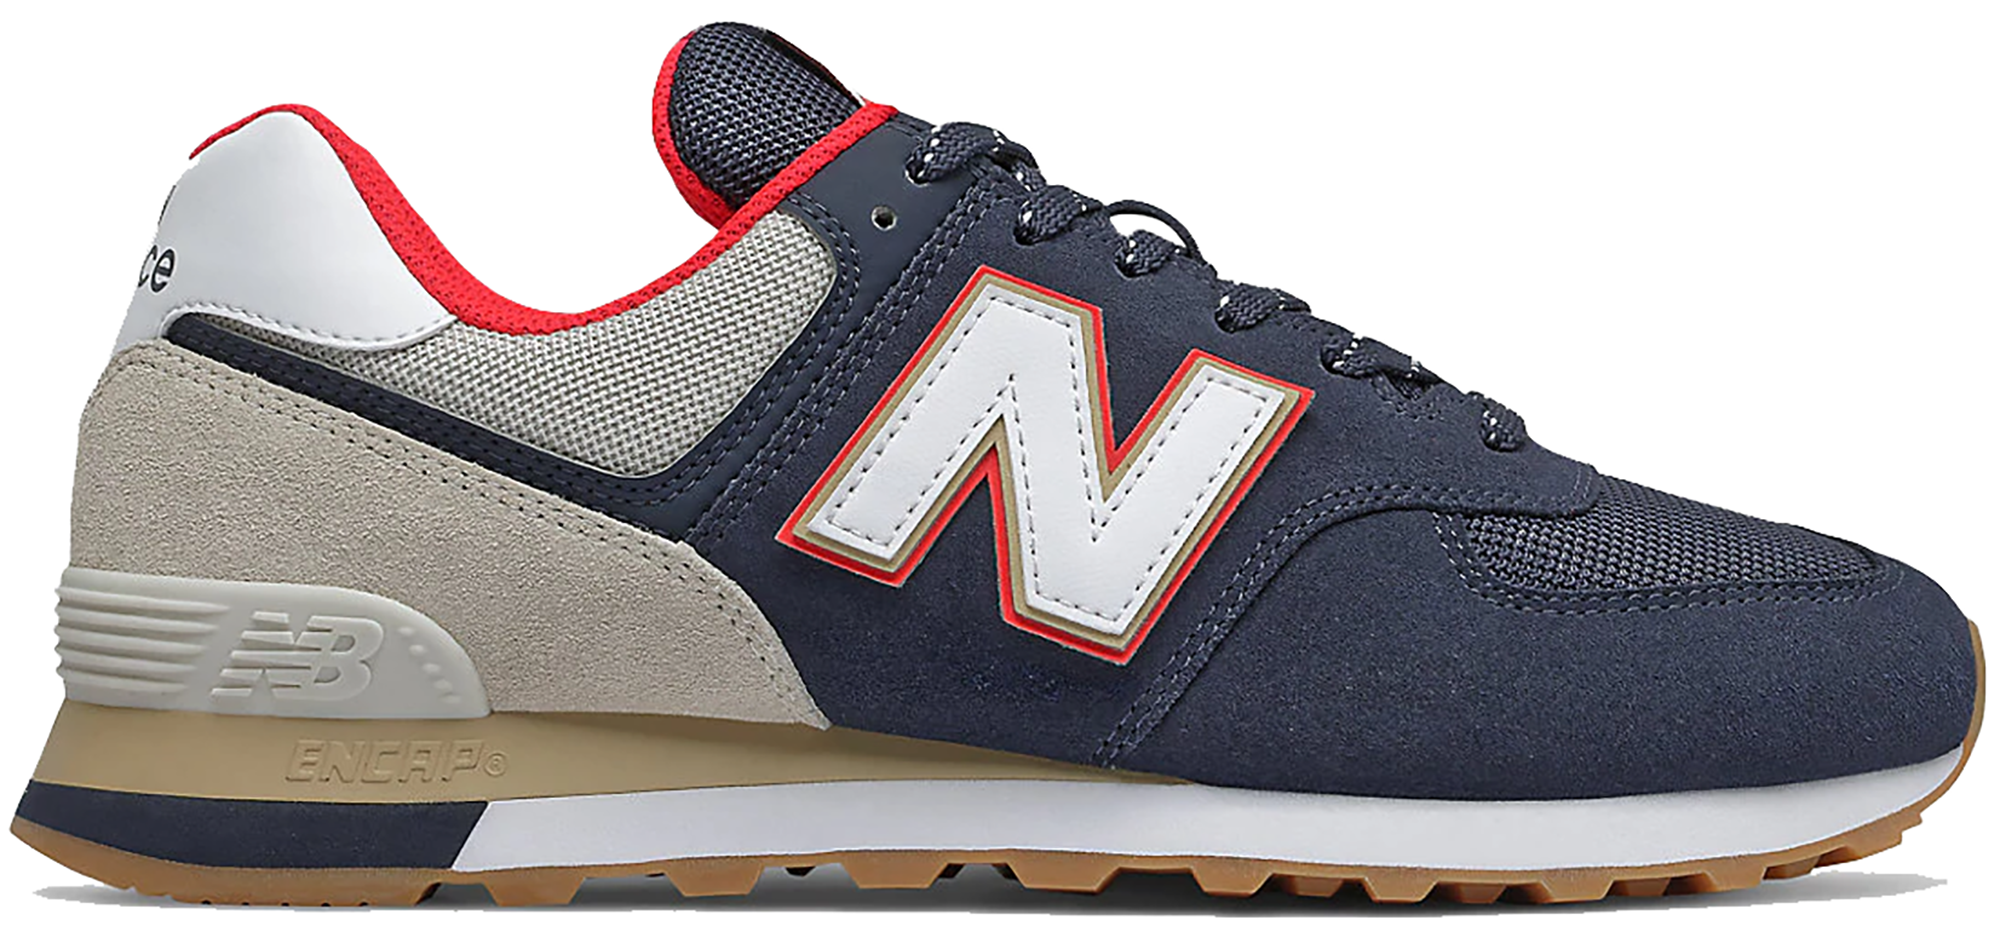 red and navy blue new balance